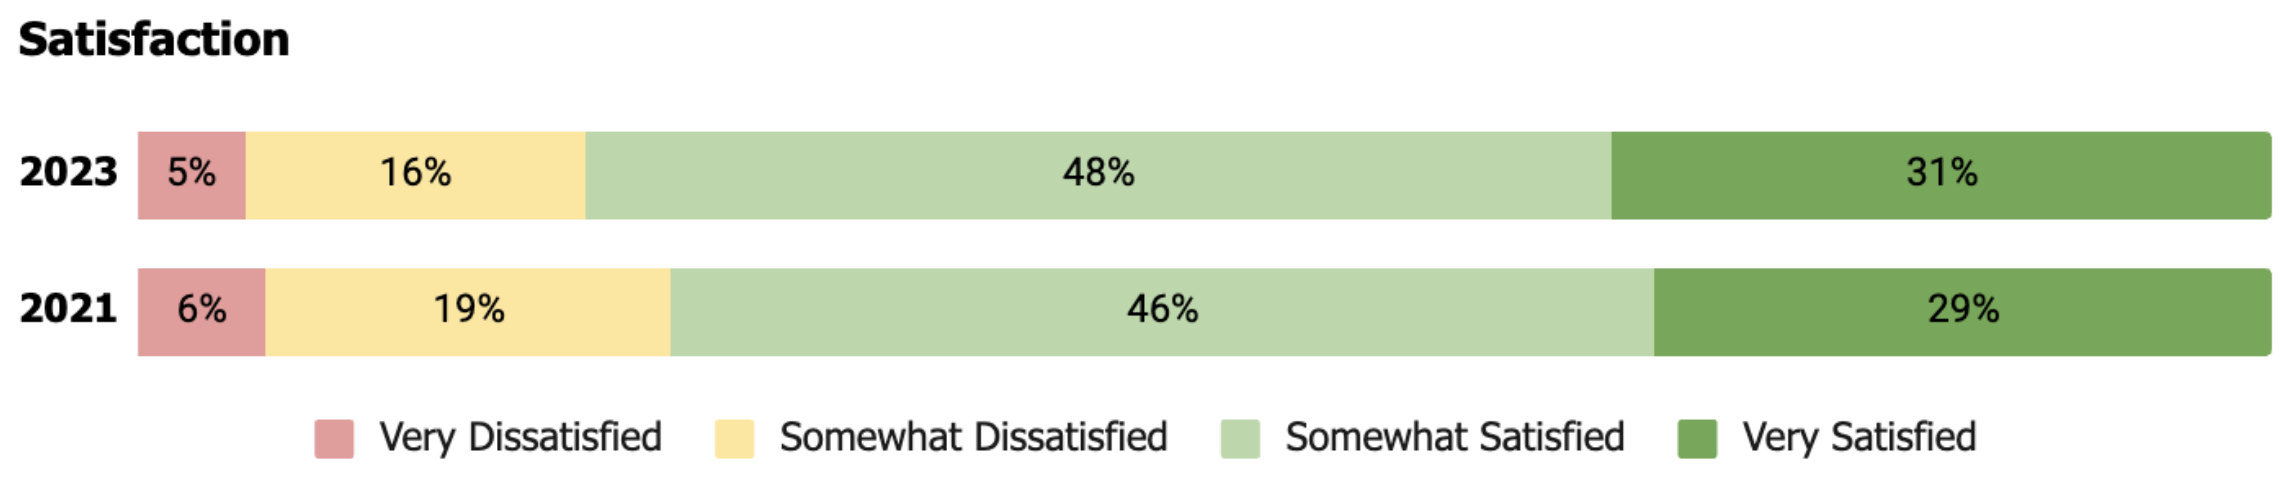 2023: 5% Very Dissatisfied, 16% Somewhat Dissatisfied, 48% Somewhat Satisfied, 31% Very Satisfied. 2021: 6% Very Dissatisfied, 19% Somewhat Dissatisfied, 46% Somewhat Satisfied, 29% Very Satisfied.